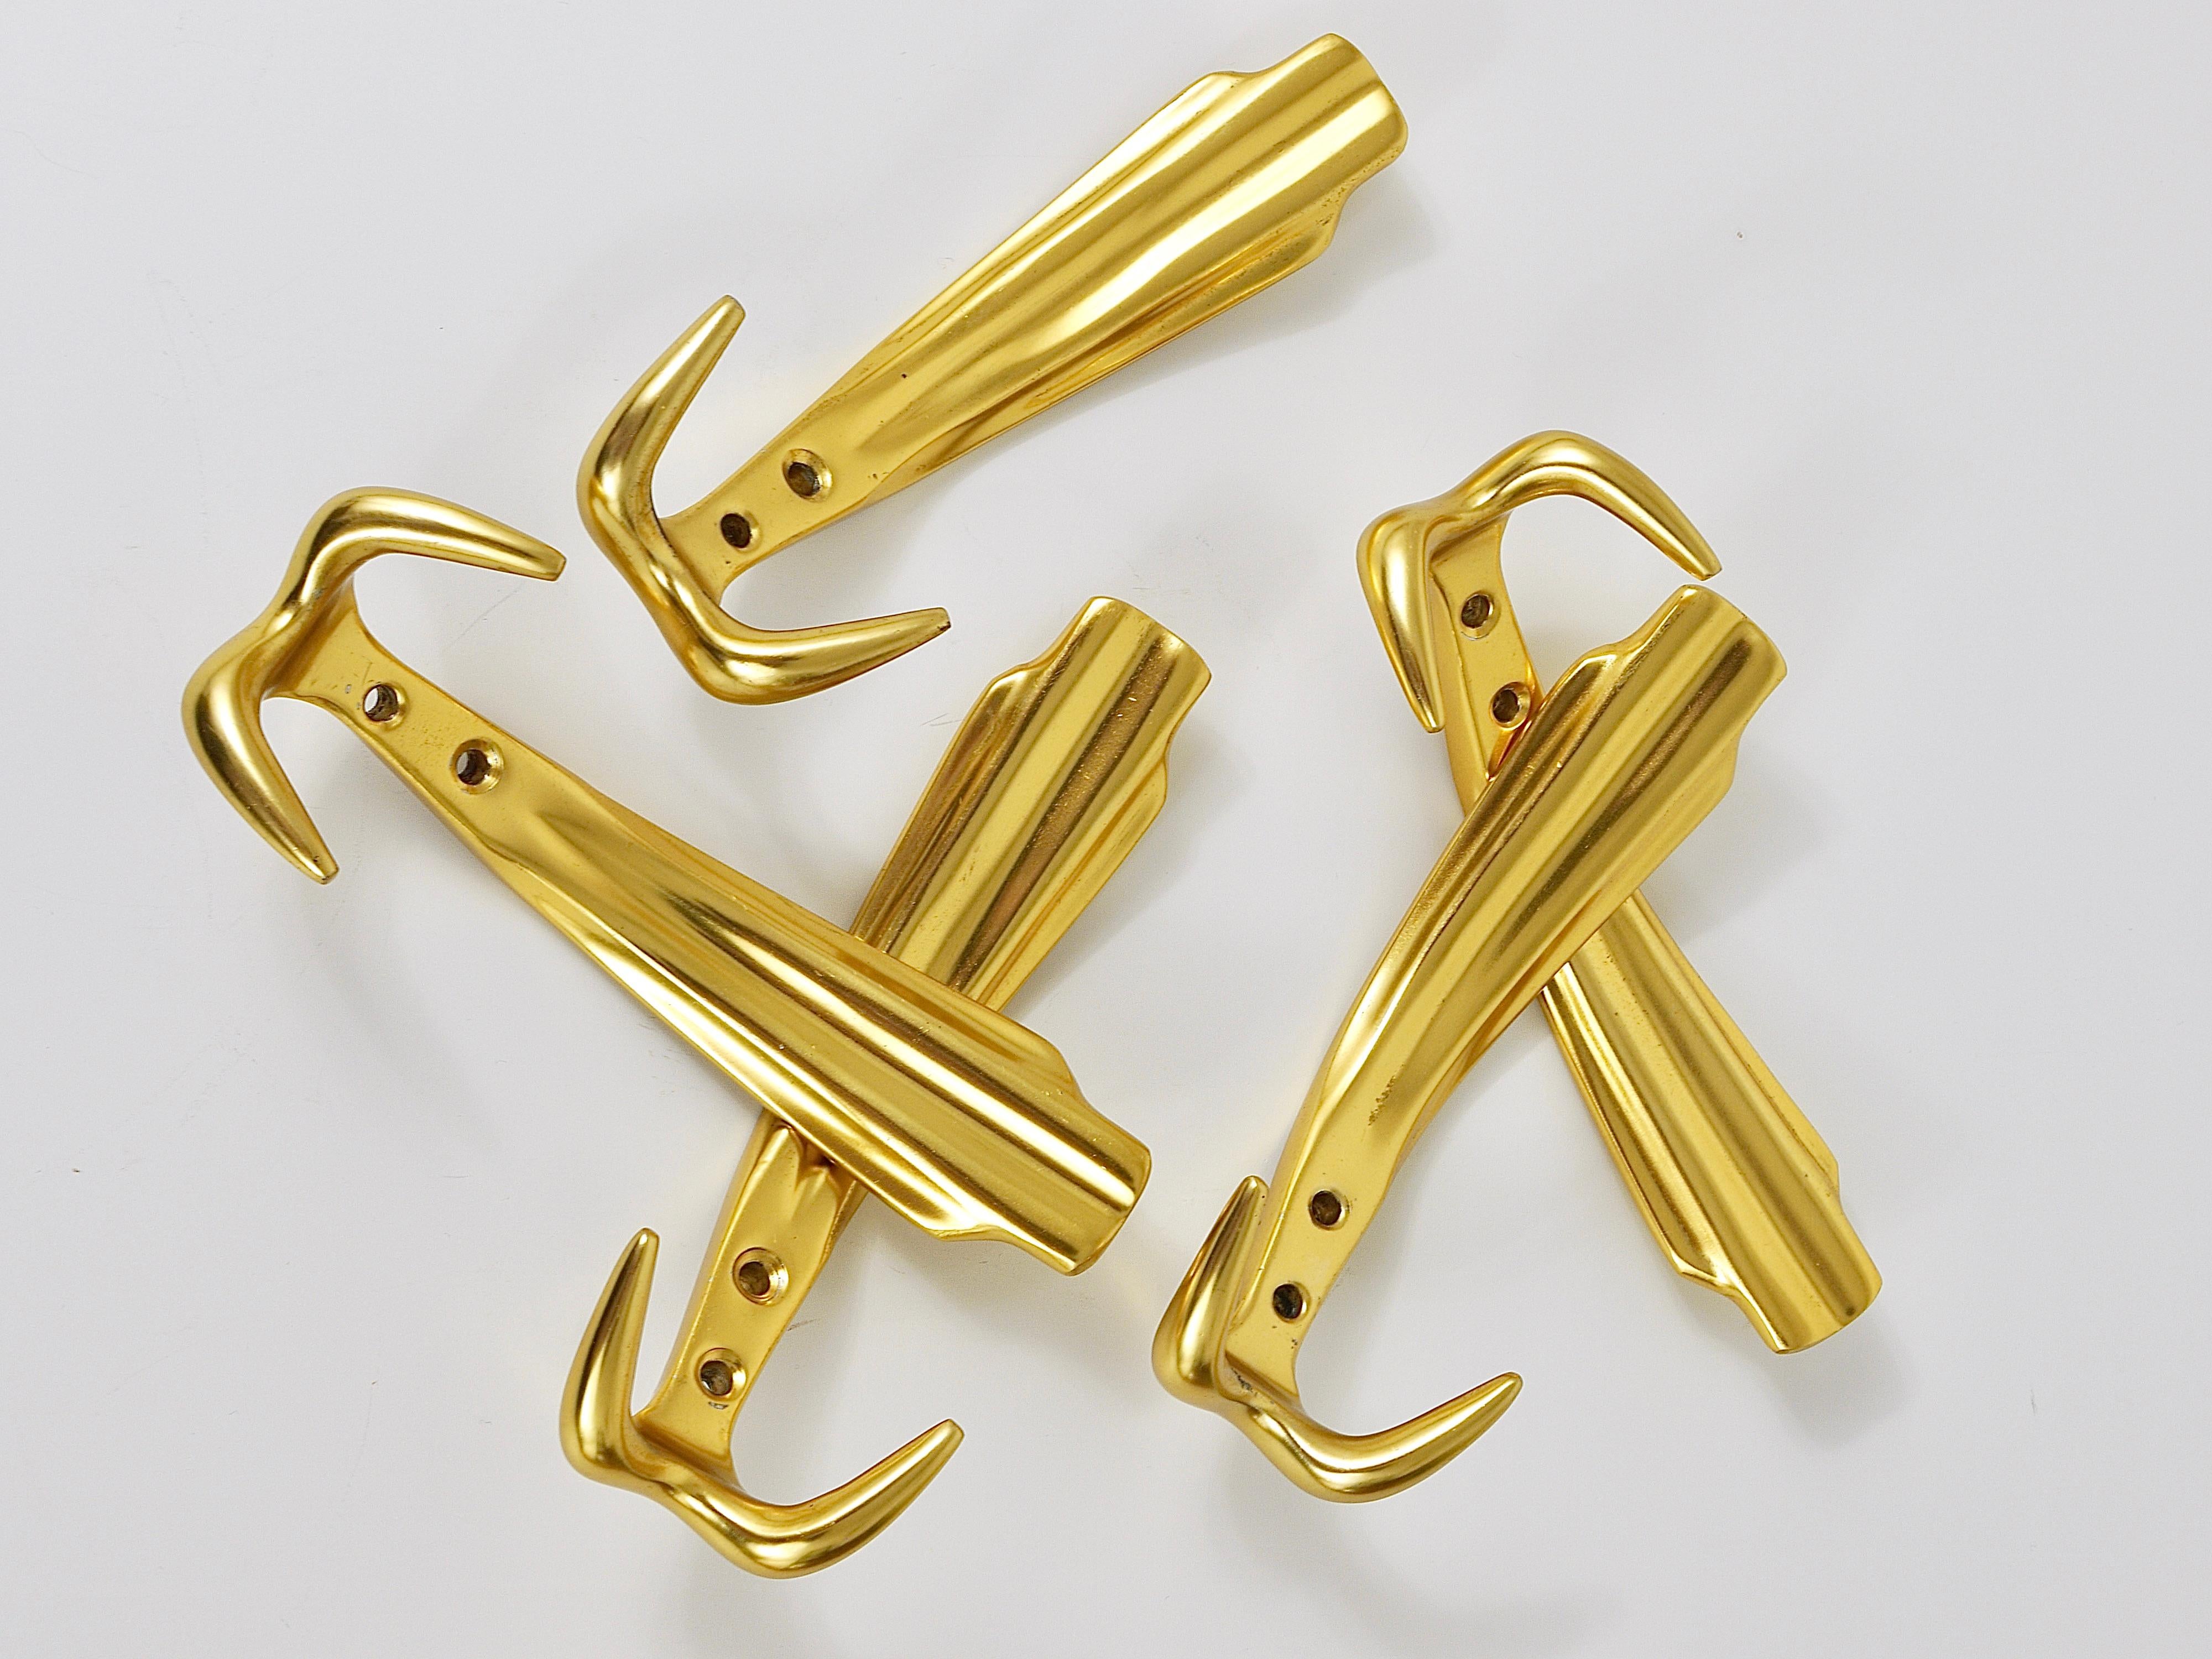 Up to five beautiful and decorative golden Hollywood Regency wall hooks from the 1970s. Made of golden anodized aluminum. The hooks are in good condition with marginal patina. Five hooks are available, sold and priced per piece. Please notice, that